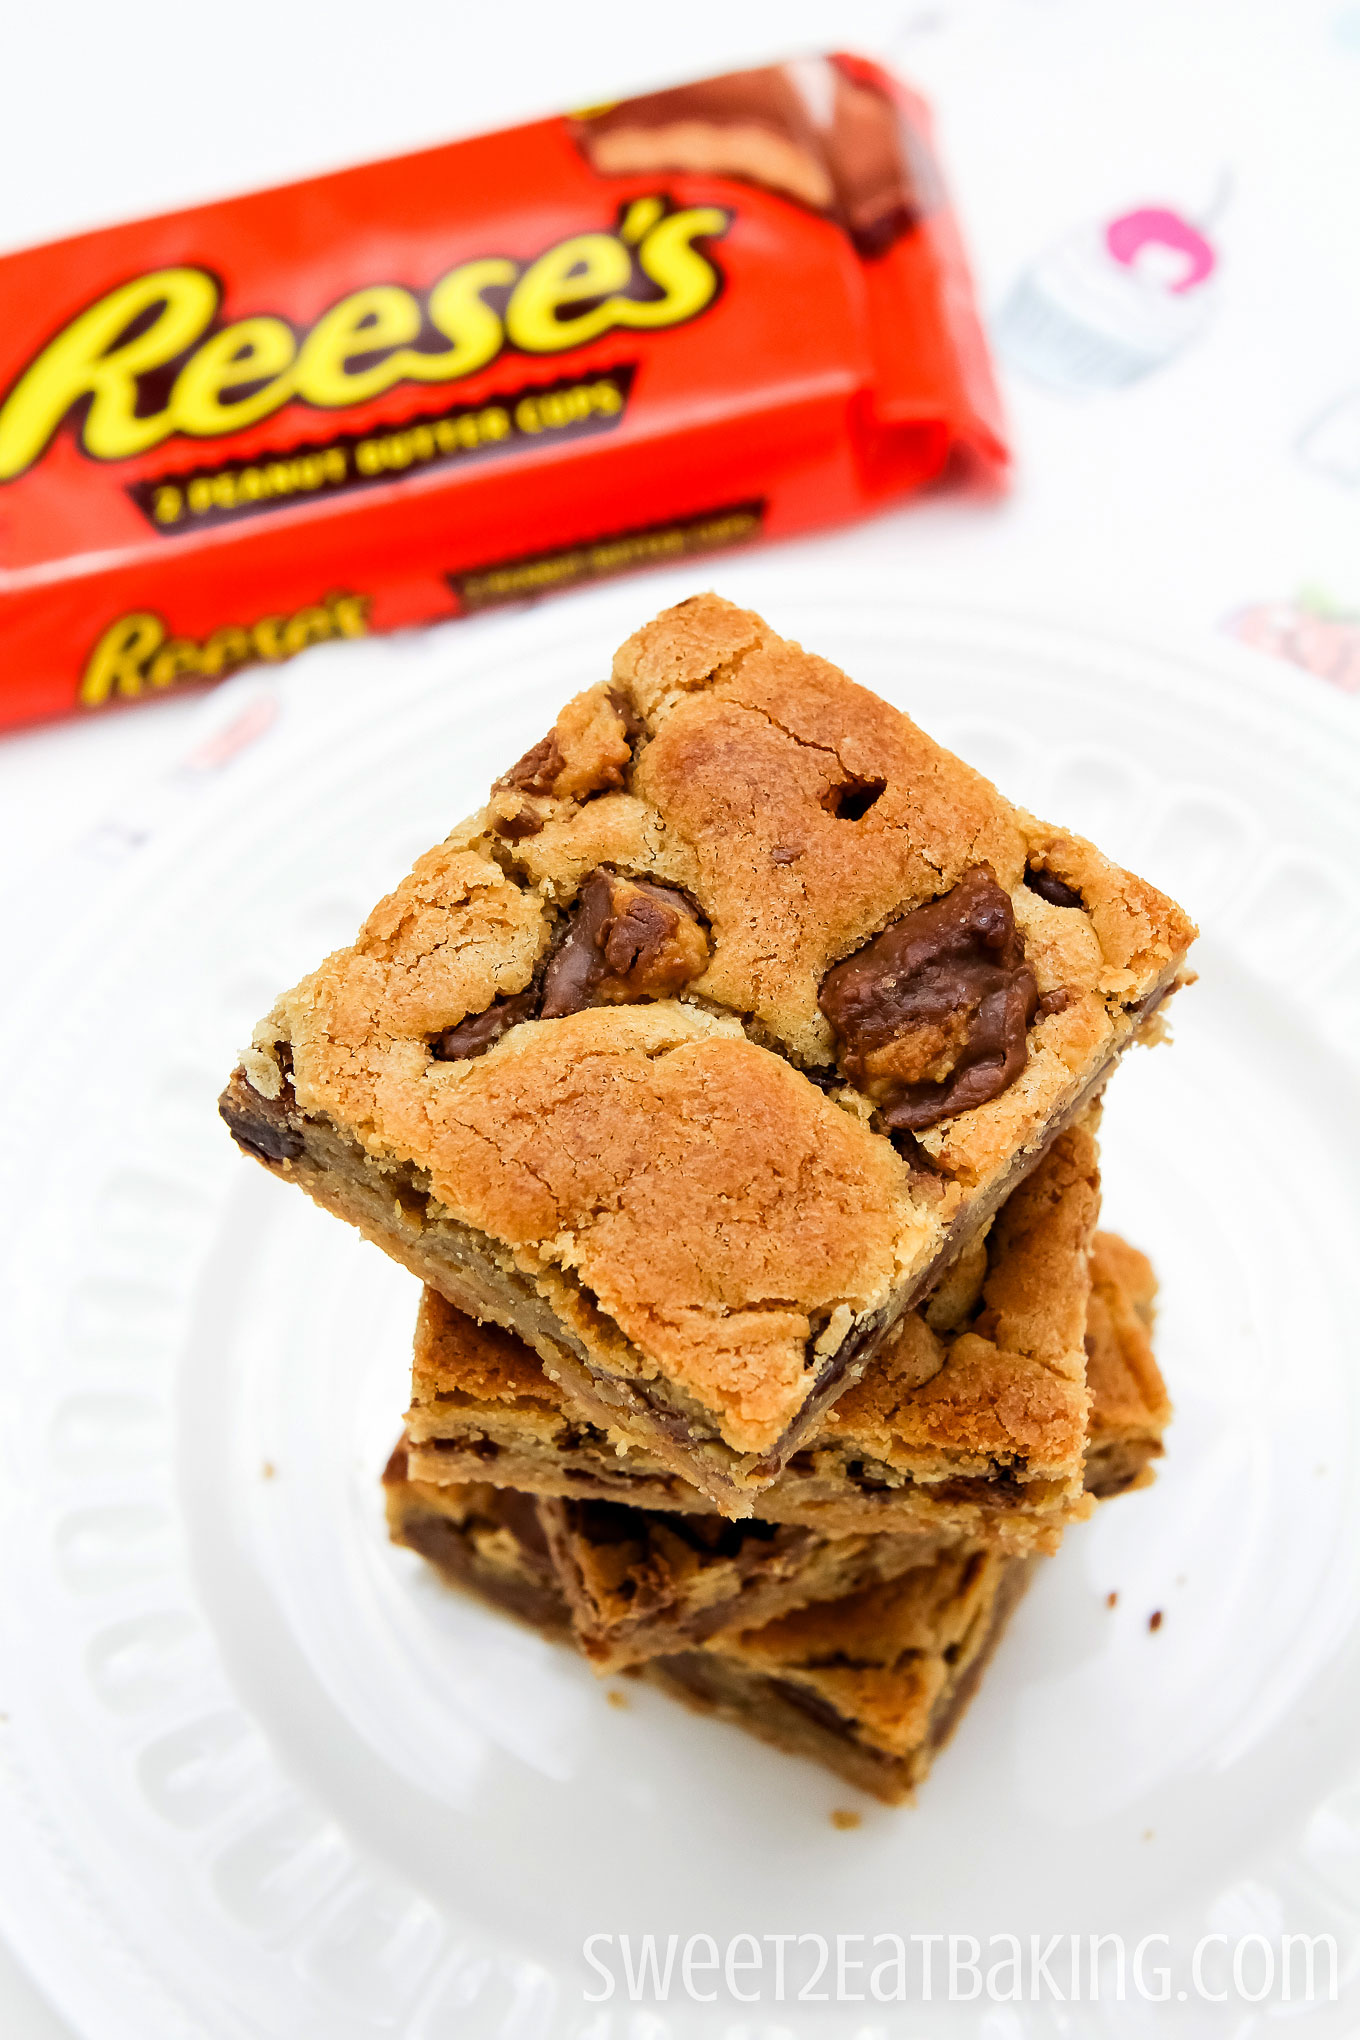 Reese's Peanut Butter Cup Blondies